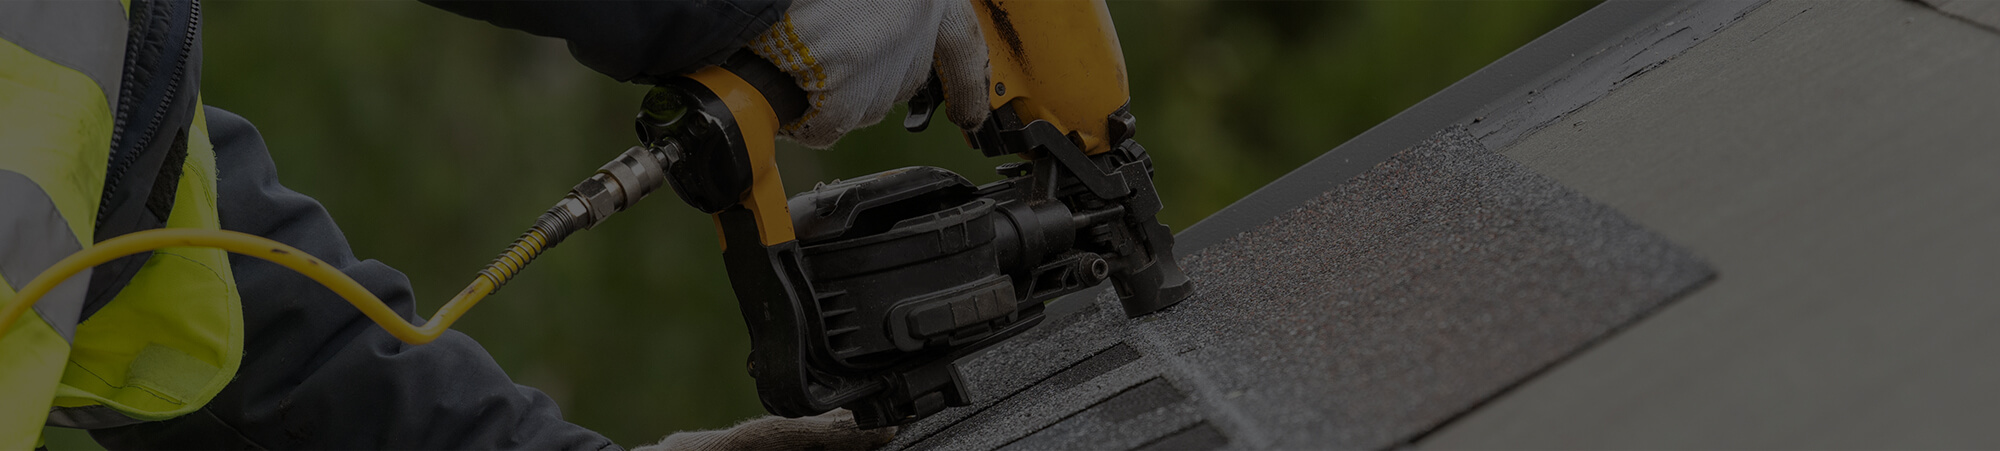 roof repair services in Green Bay